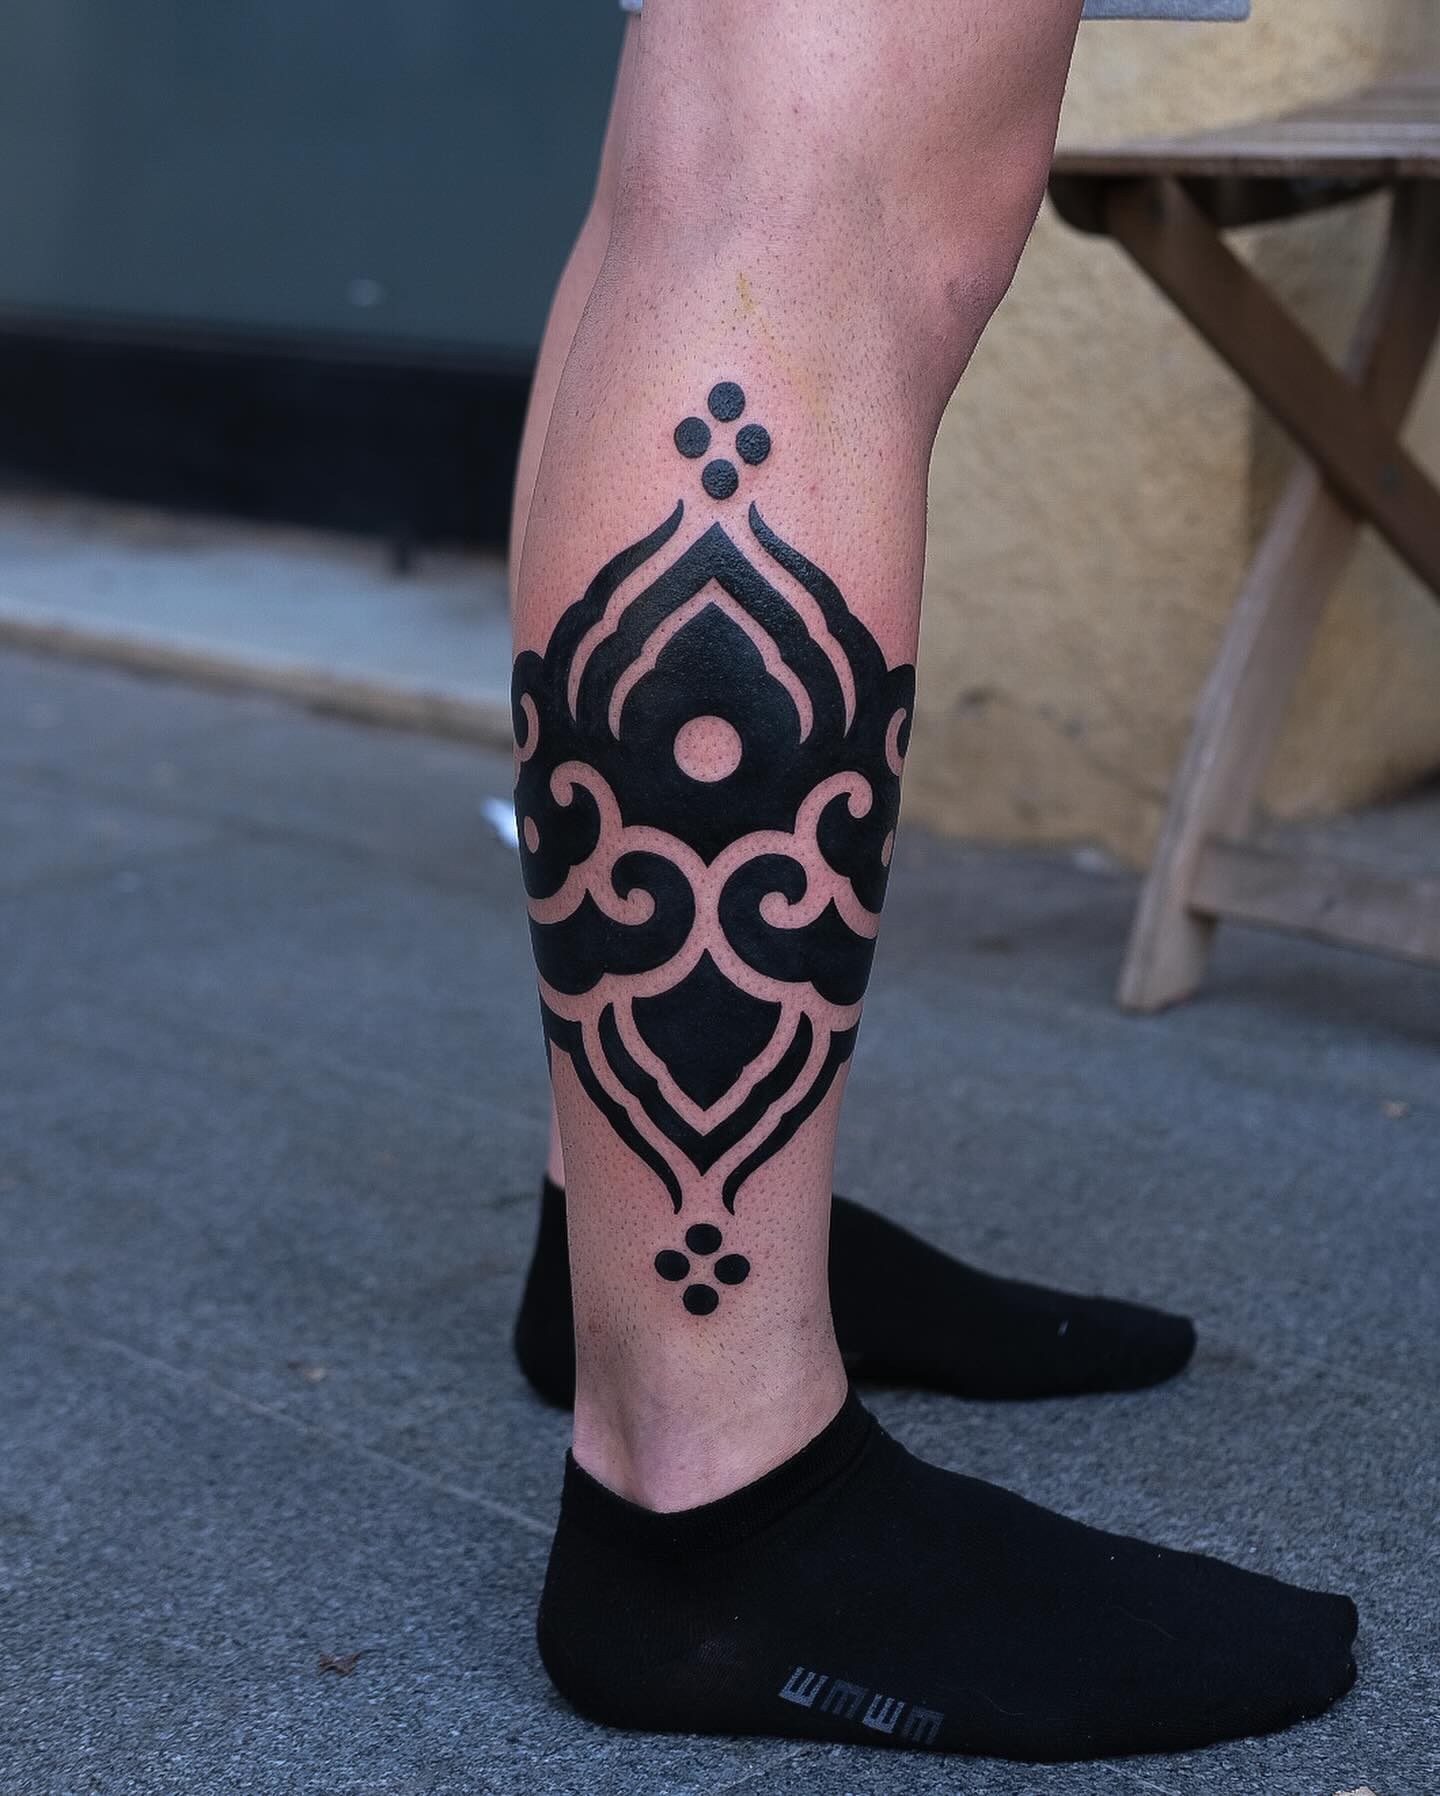 45 People Showing Off Their Awesome Leg Tattoos